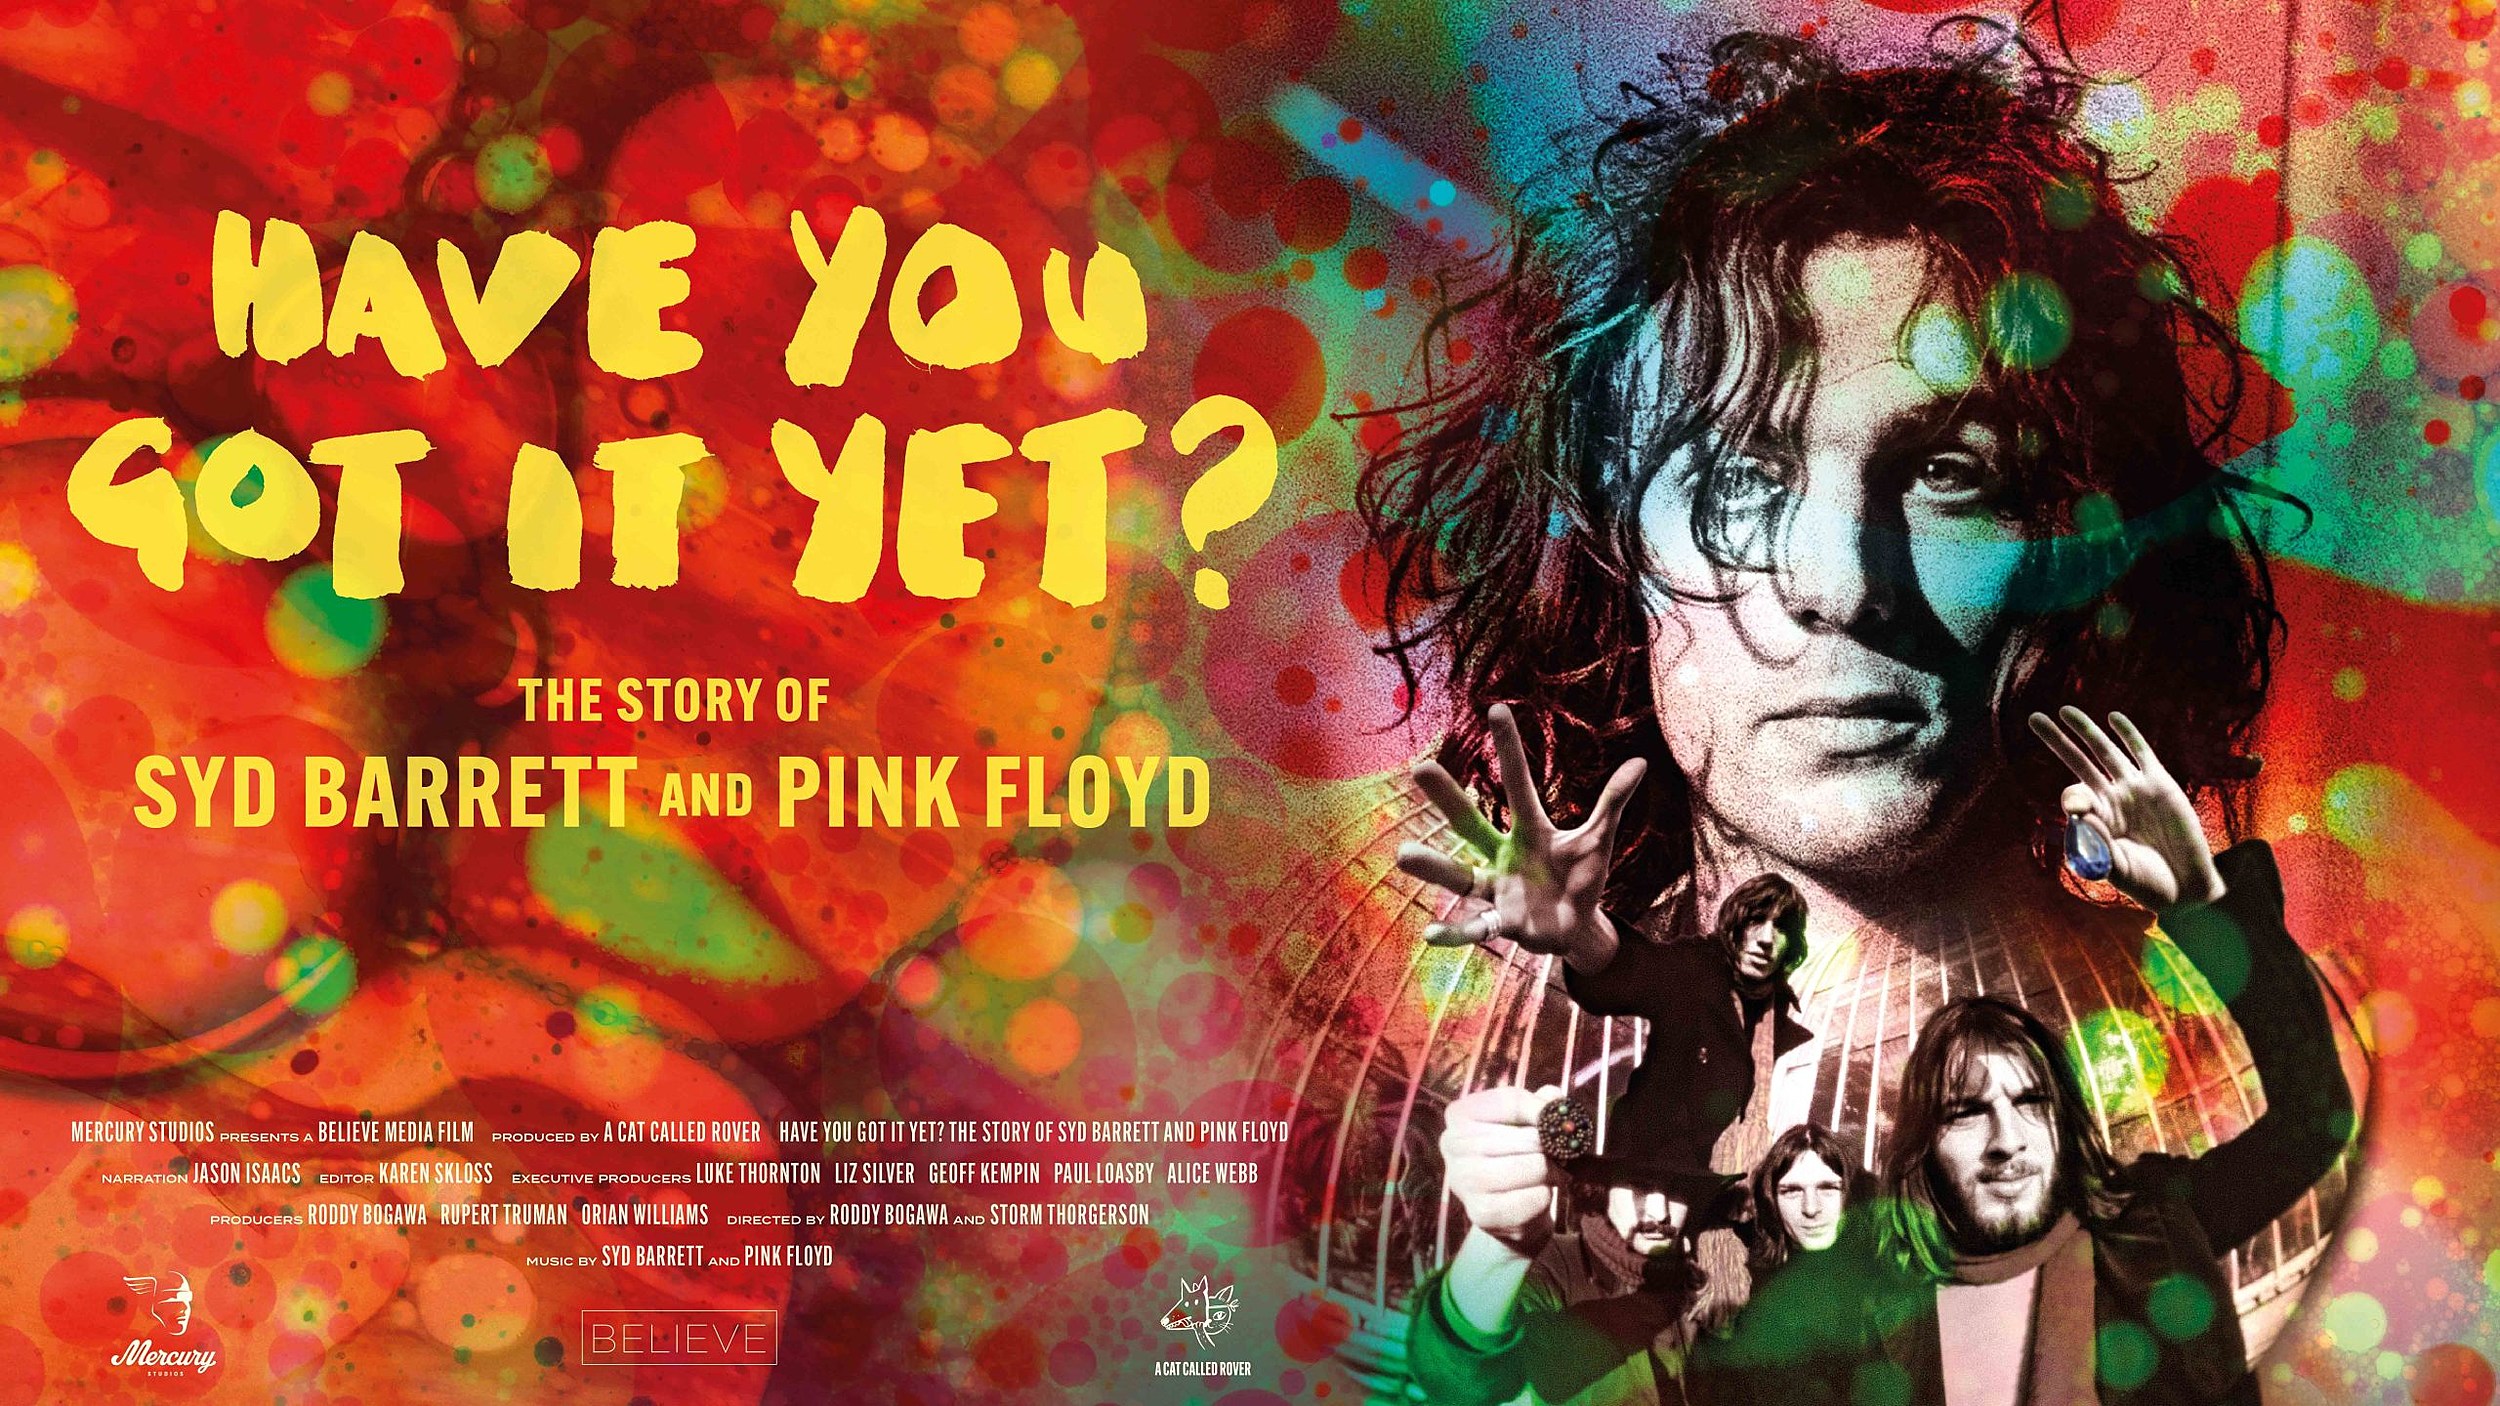 Film poster for HAVE YOU GOT IT YET? THE STORY OF SYD BARRETT AND PINK FLOYD